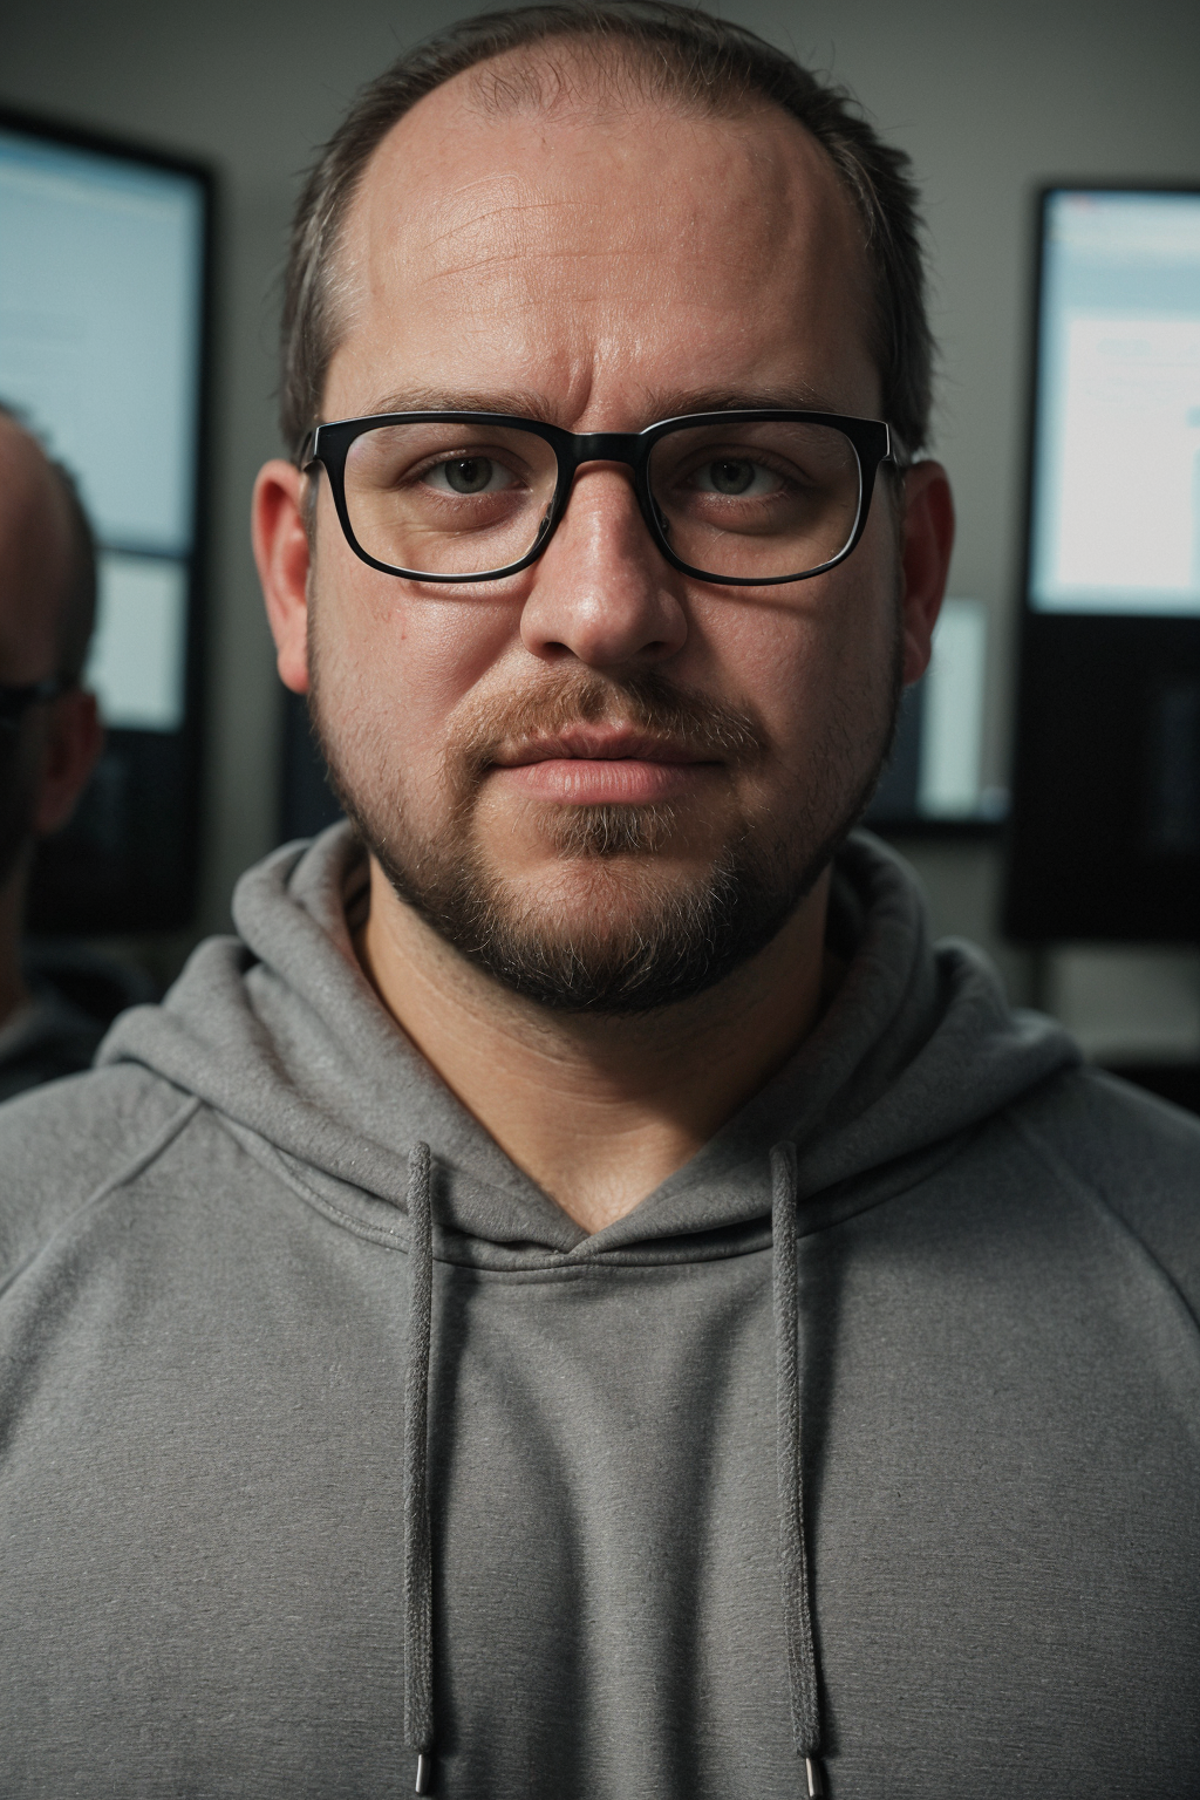 A man wearing glasses and a hooded sweatshirt is staring at the camera.